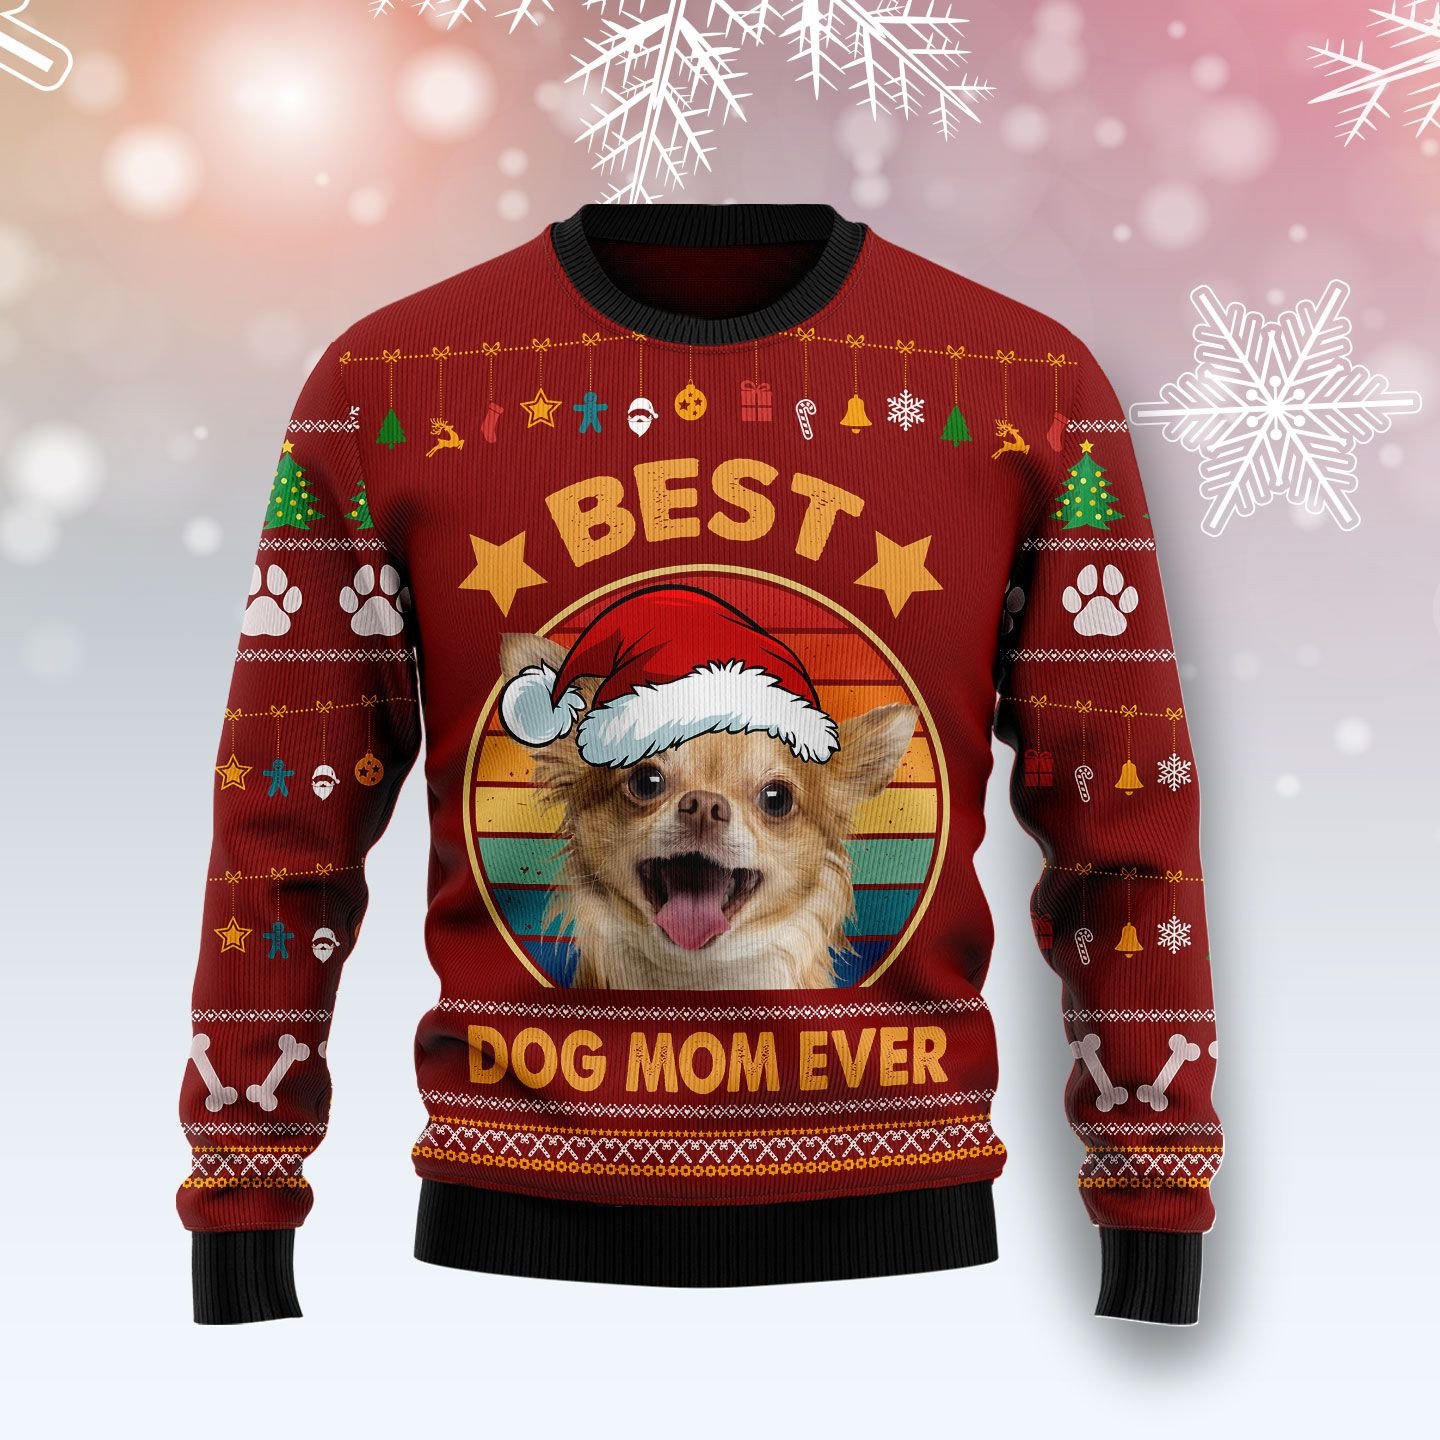 Chihuahua Best Dog Mom Ever Ugly Christmas Sweater Ugly Sweater For Men Women